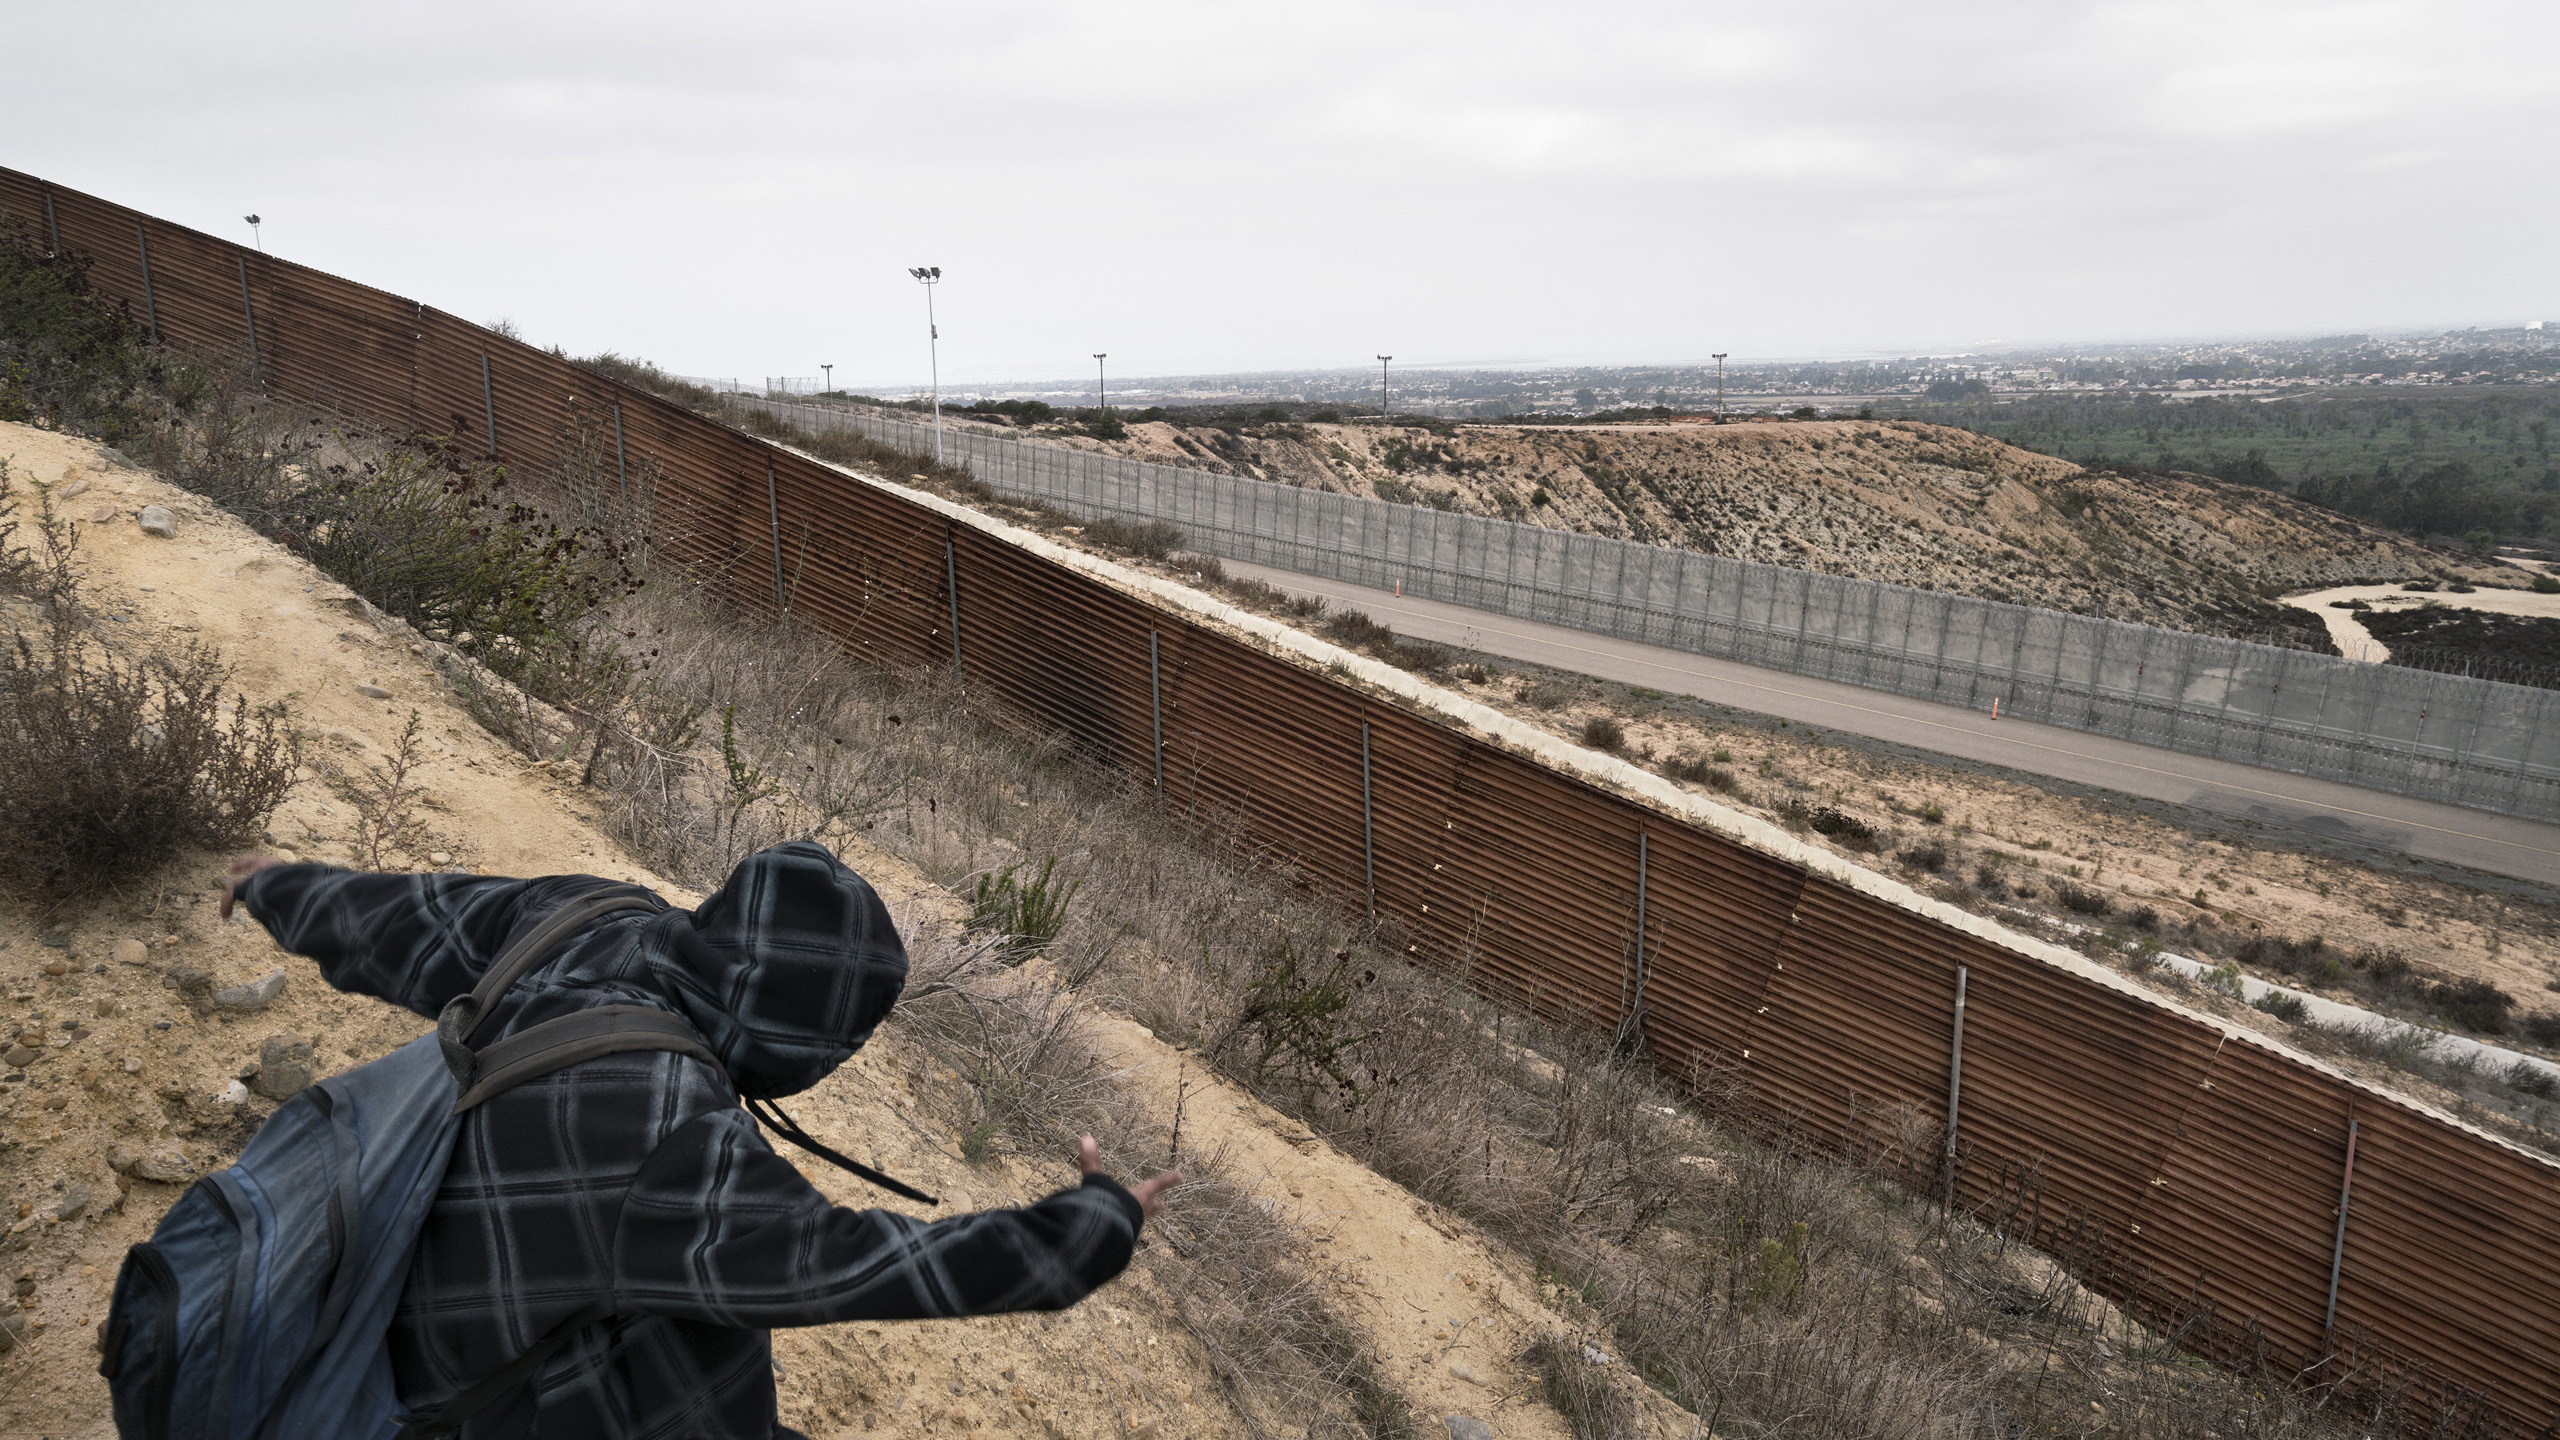 Along the border between Mexico and the U.S. a Salvadorian migrant is looking for a way to cross the border. Tijuana, Baja California, Mexico. Oct. 11, 2016.